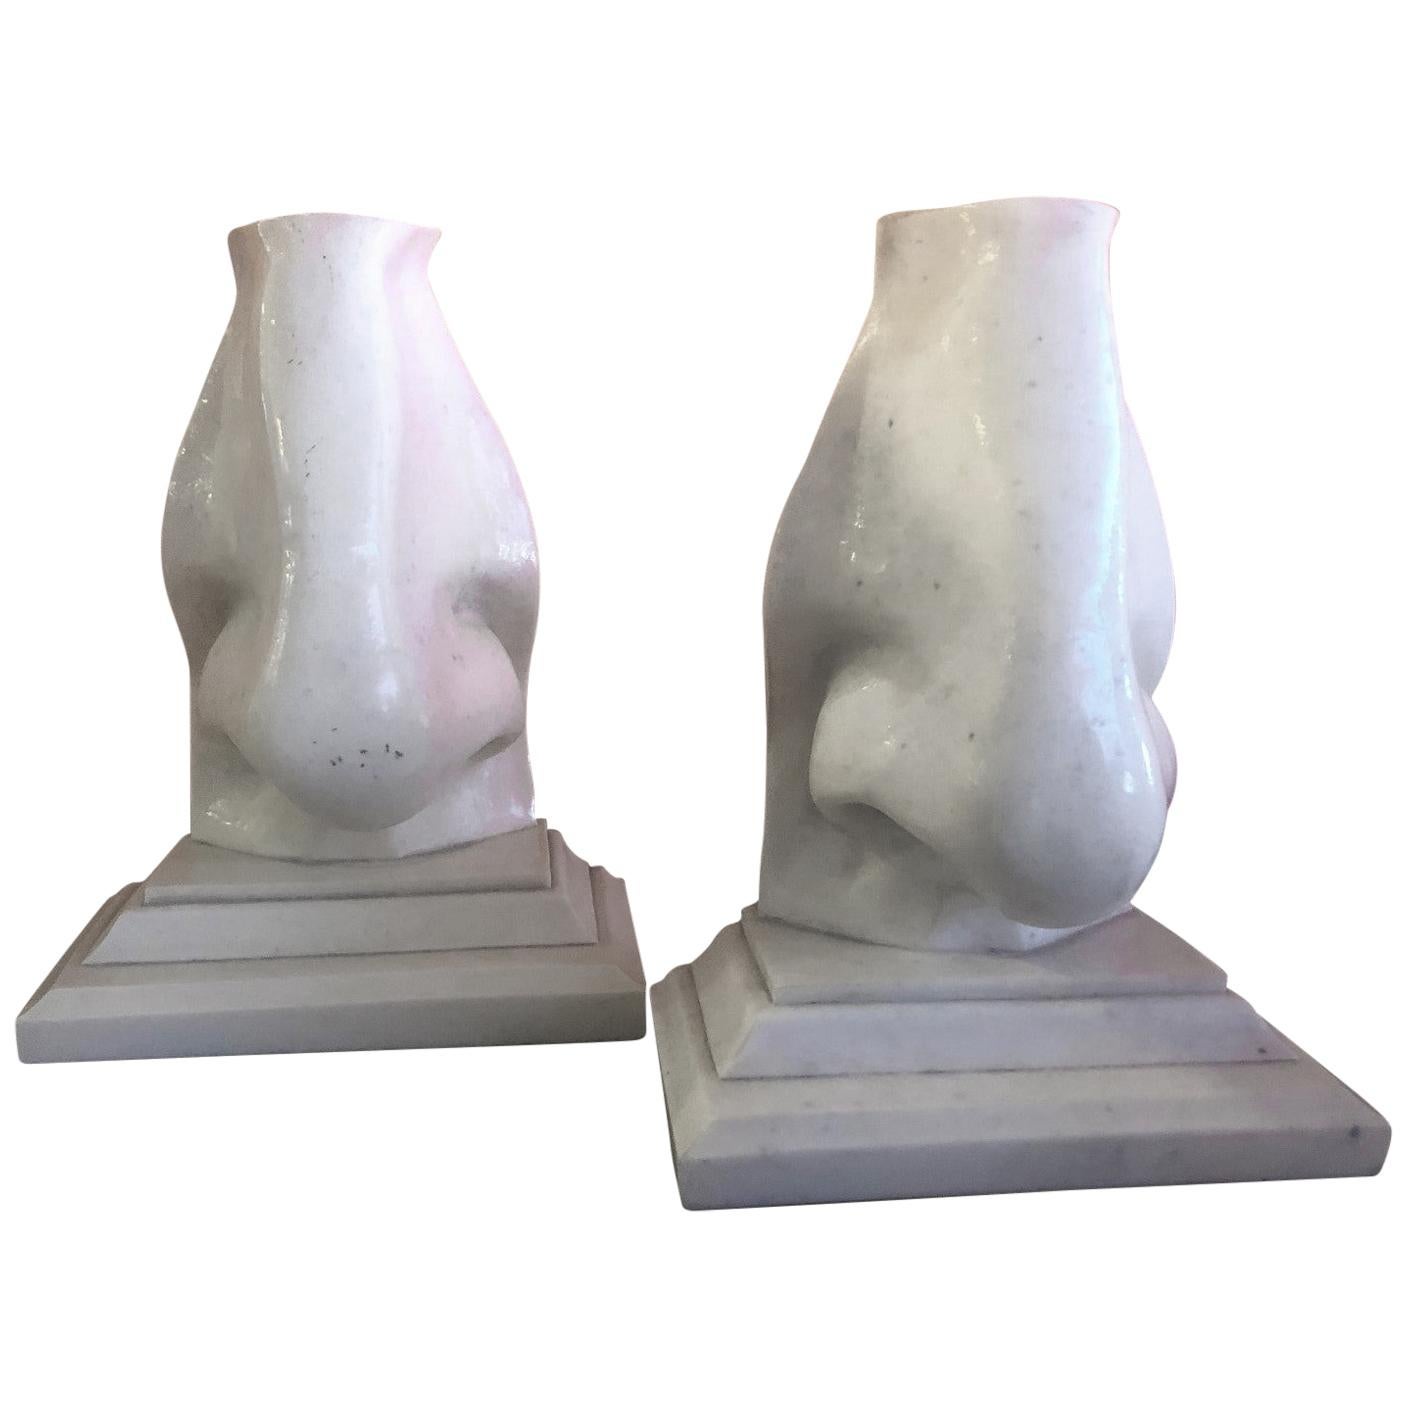 Pair of Faux Marble Pop Art "Nose" Bookends For Sale